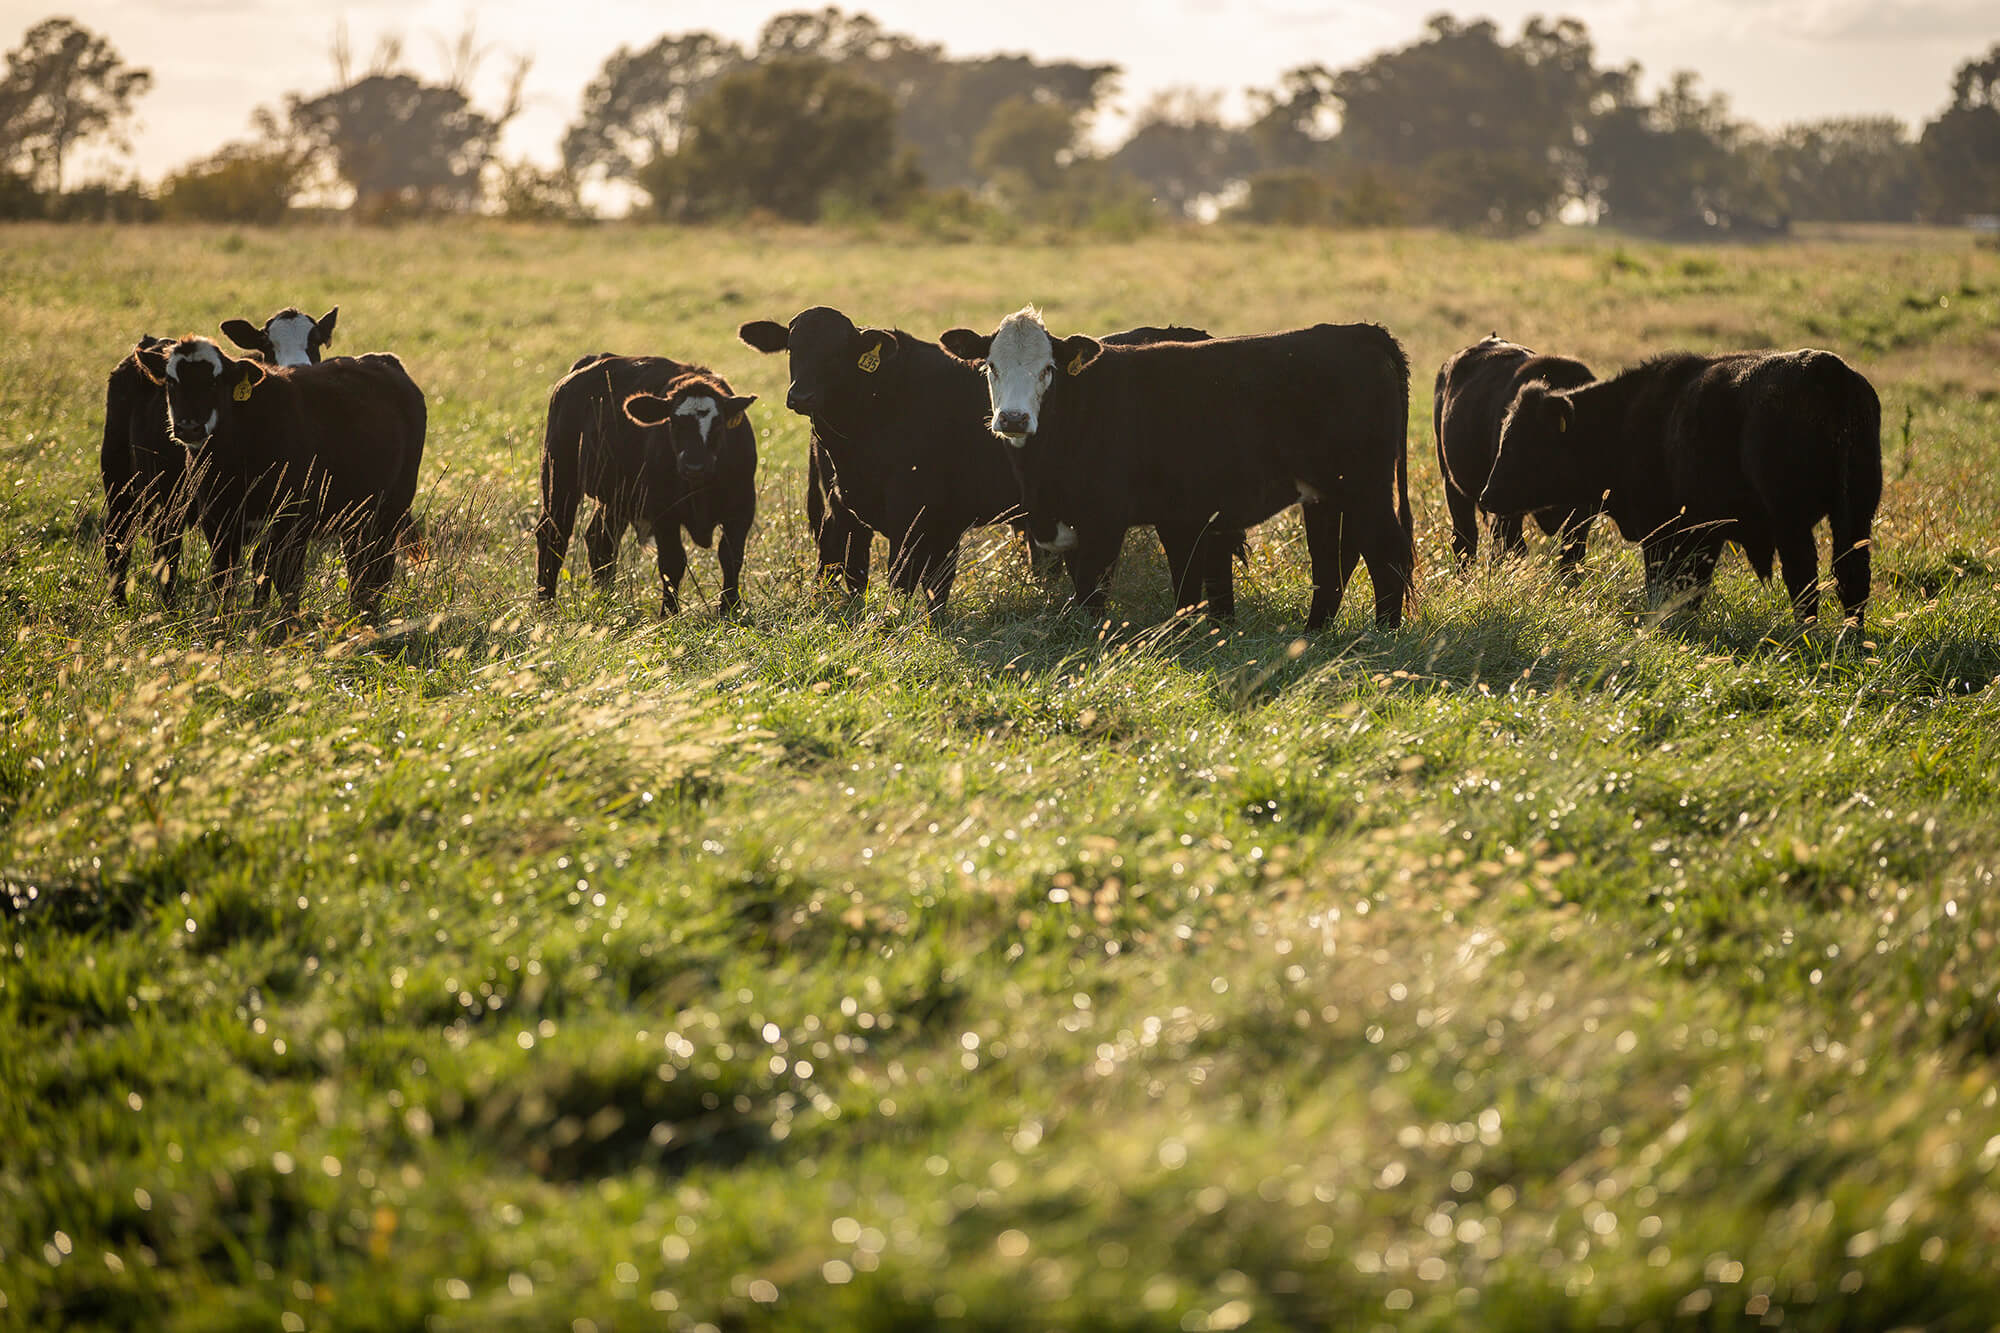 Grazing is the single largest land use in the U.S., with about 85% of the nationu2019s 655 million acres unsuitable for production of human food crops.